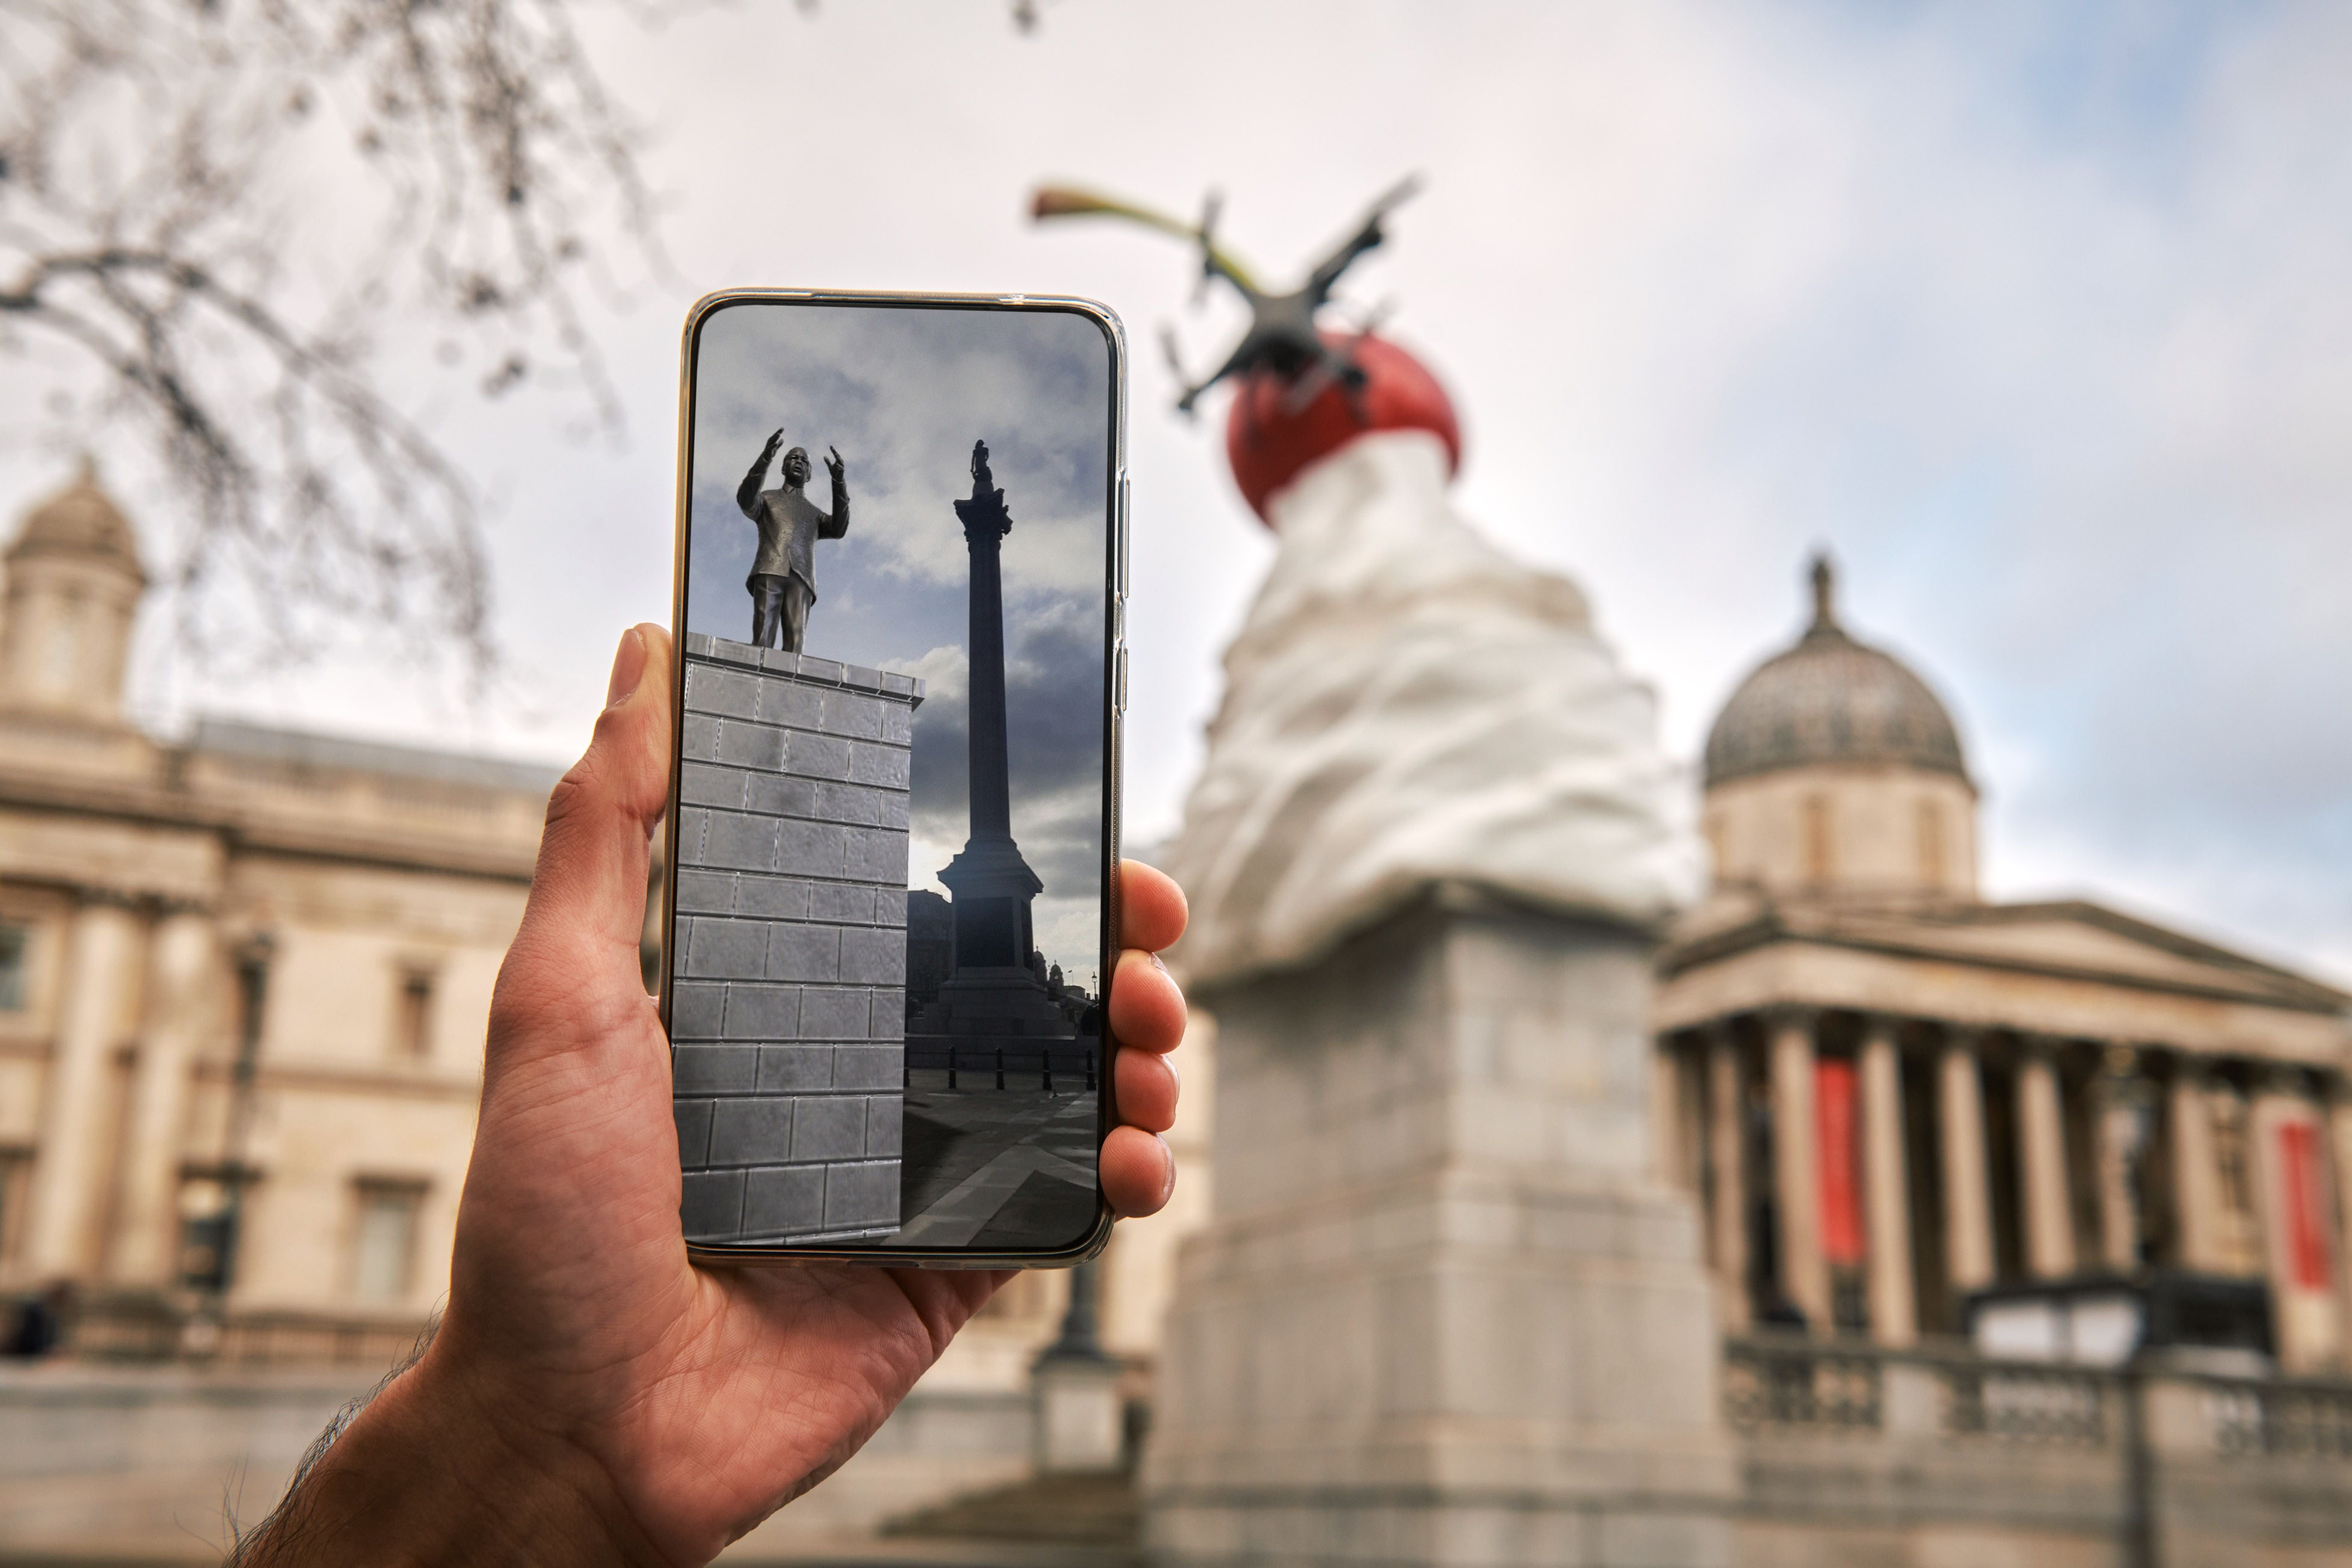 Snapchatters can learn the stories of Black British history that live behind monuments in London locations